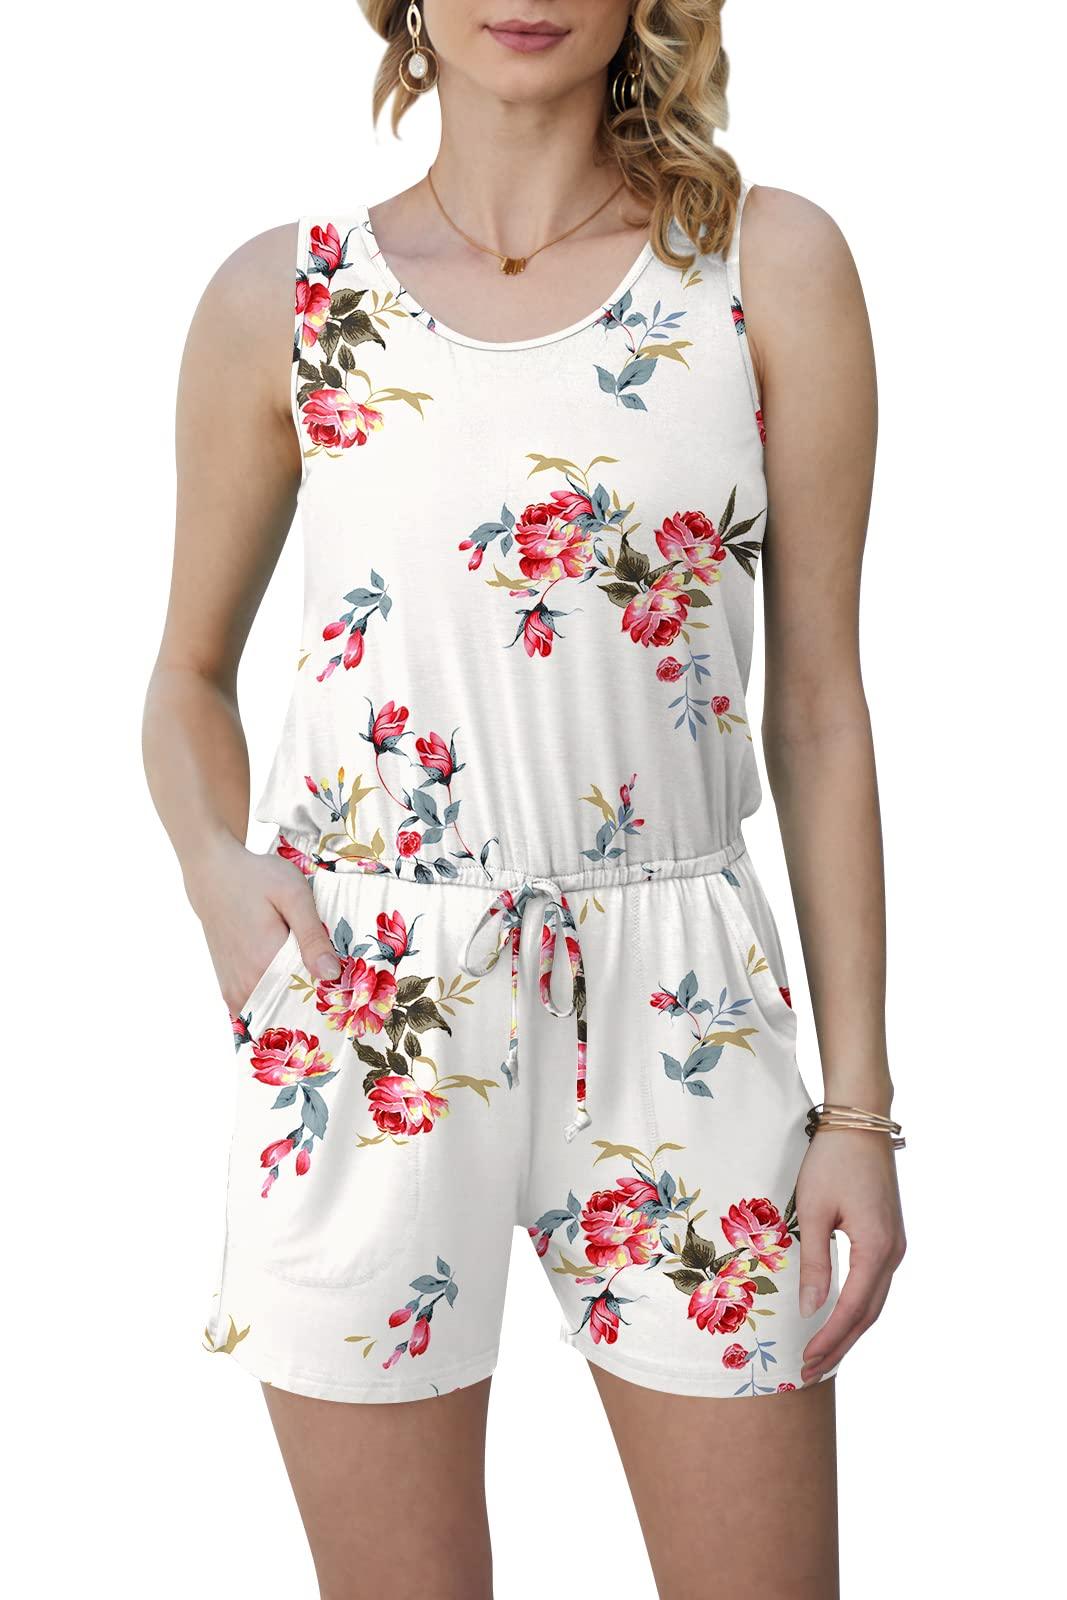 DouBCQ Womens Summer Casual Sleeveless Loose Jumpsuits Romper with Pockets (Floral Red White, X-Large) - Bona Fide Fashion